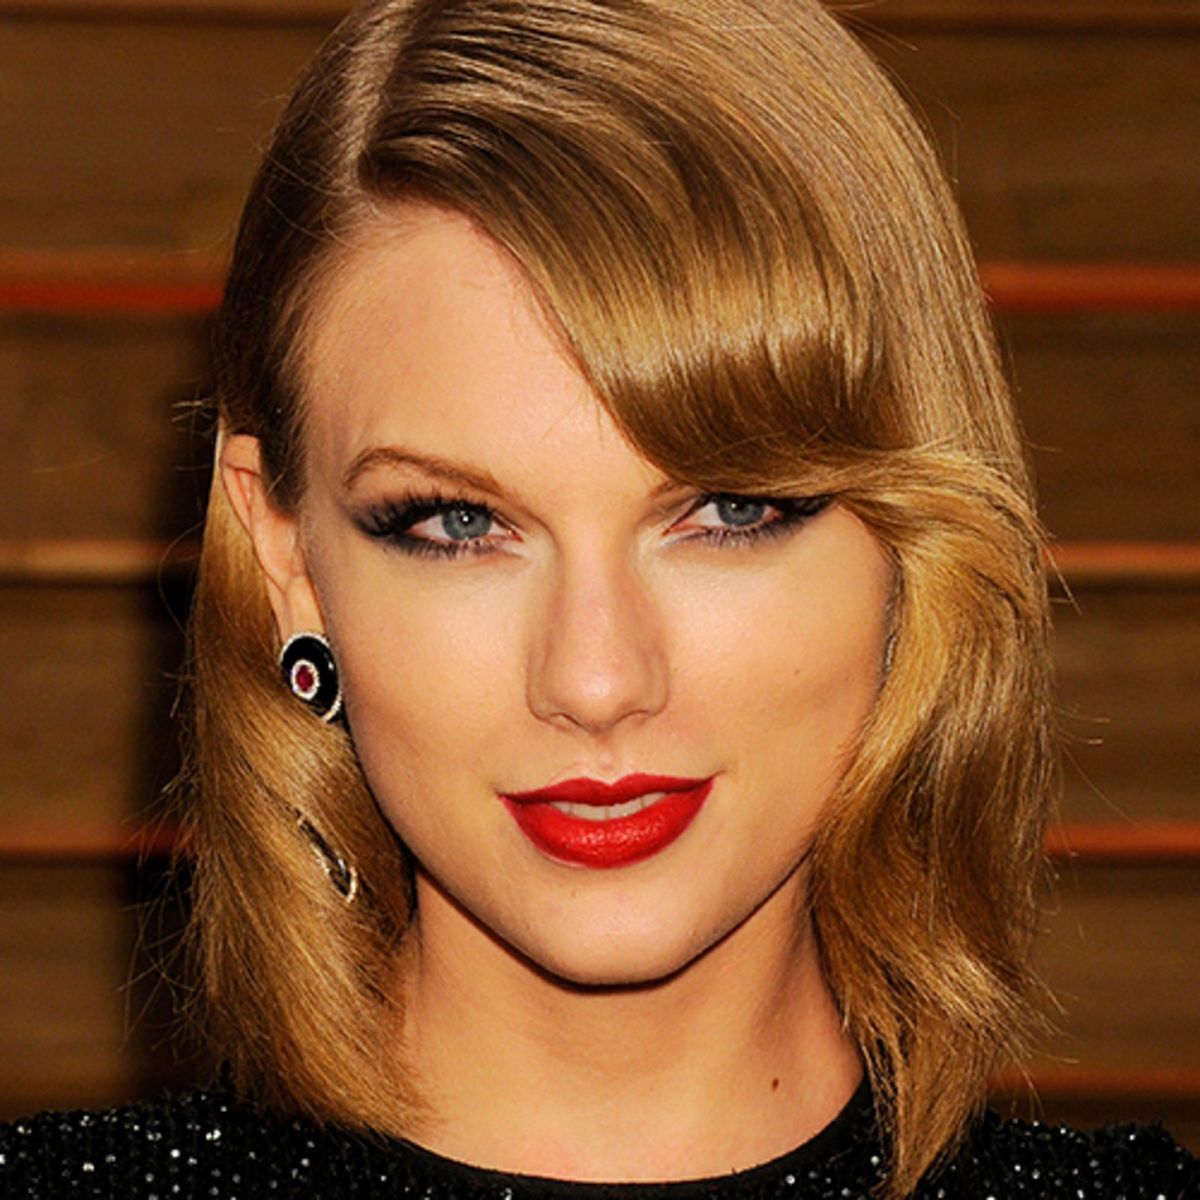 2048 Taylor Swift Exes - Taylor Swift 2048